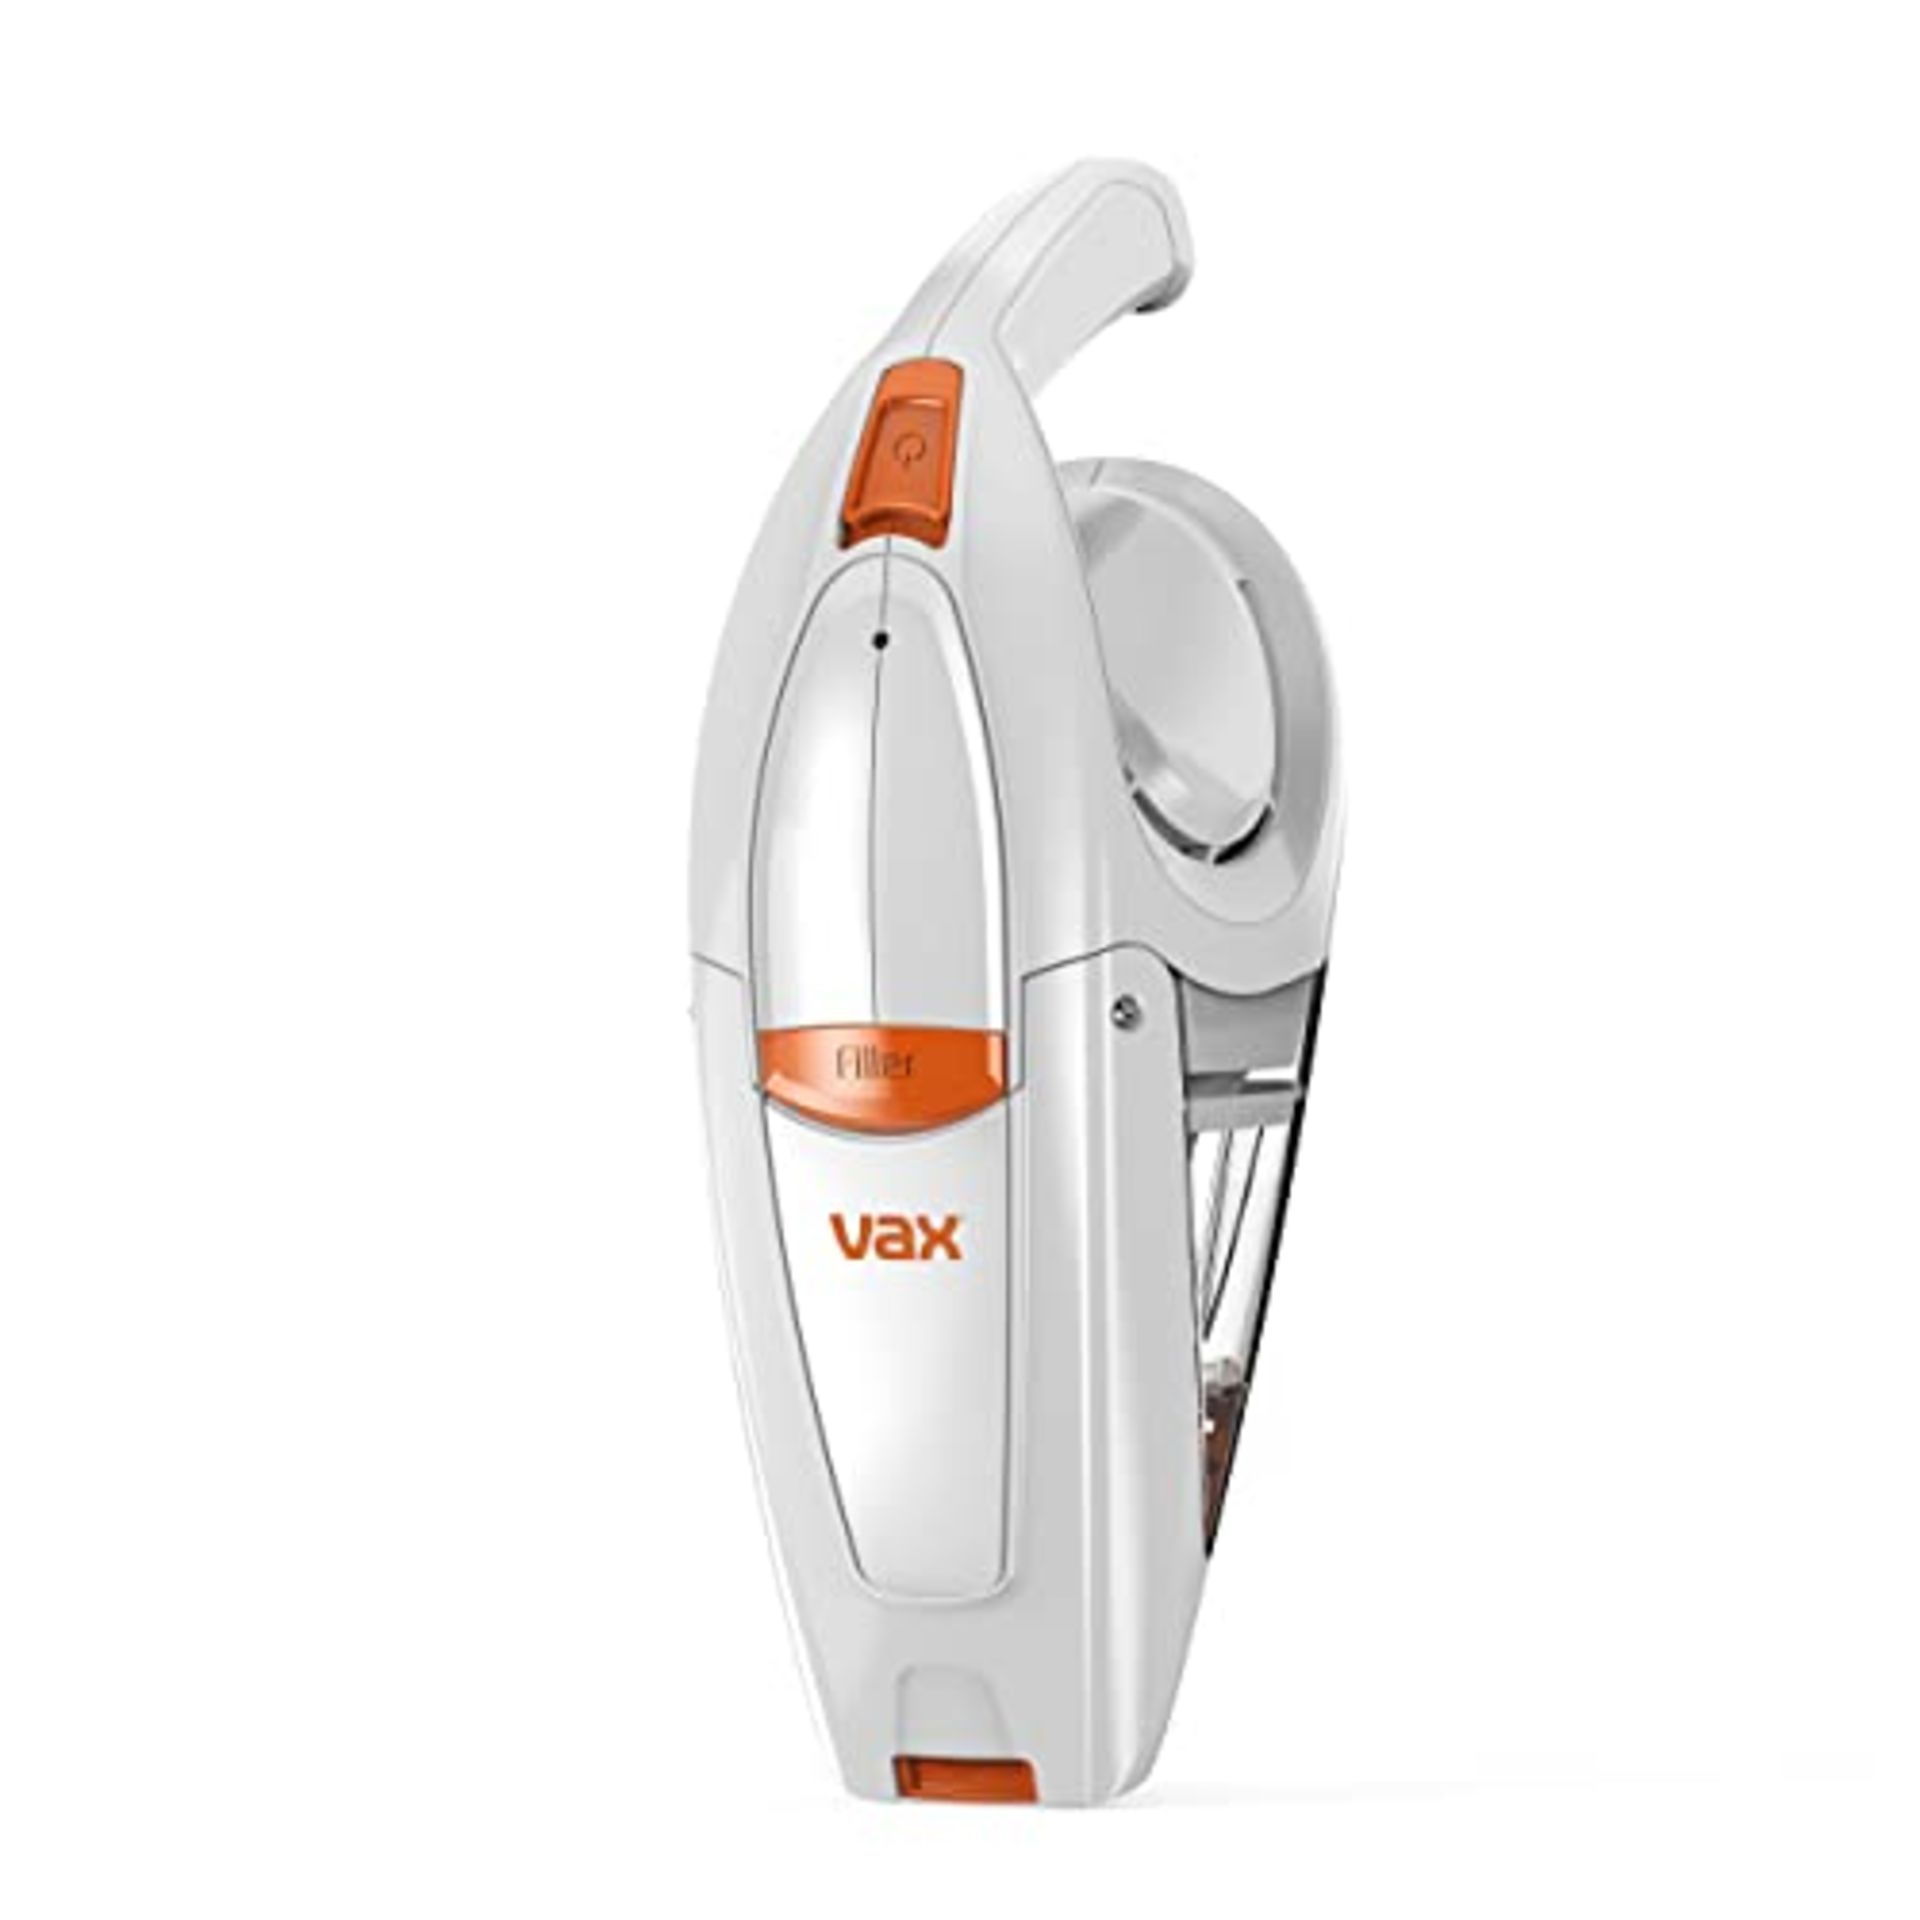 Vax Gator Cordless Handheld Vacuum Cleaner | Lightweight, Quick Cleaning | Built-in Cr